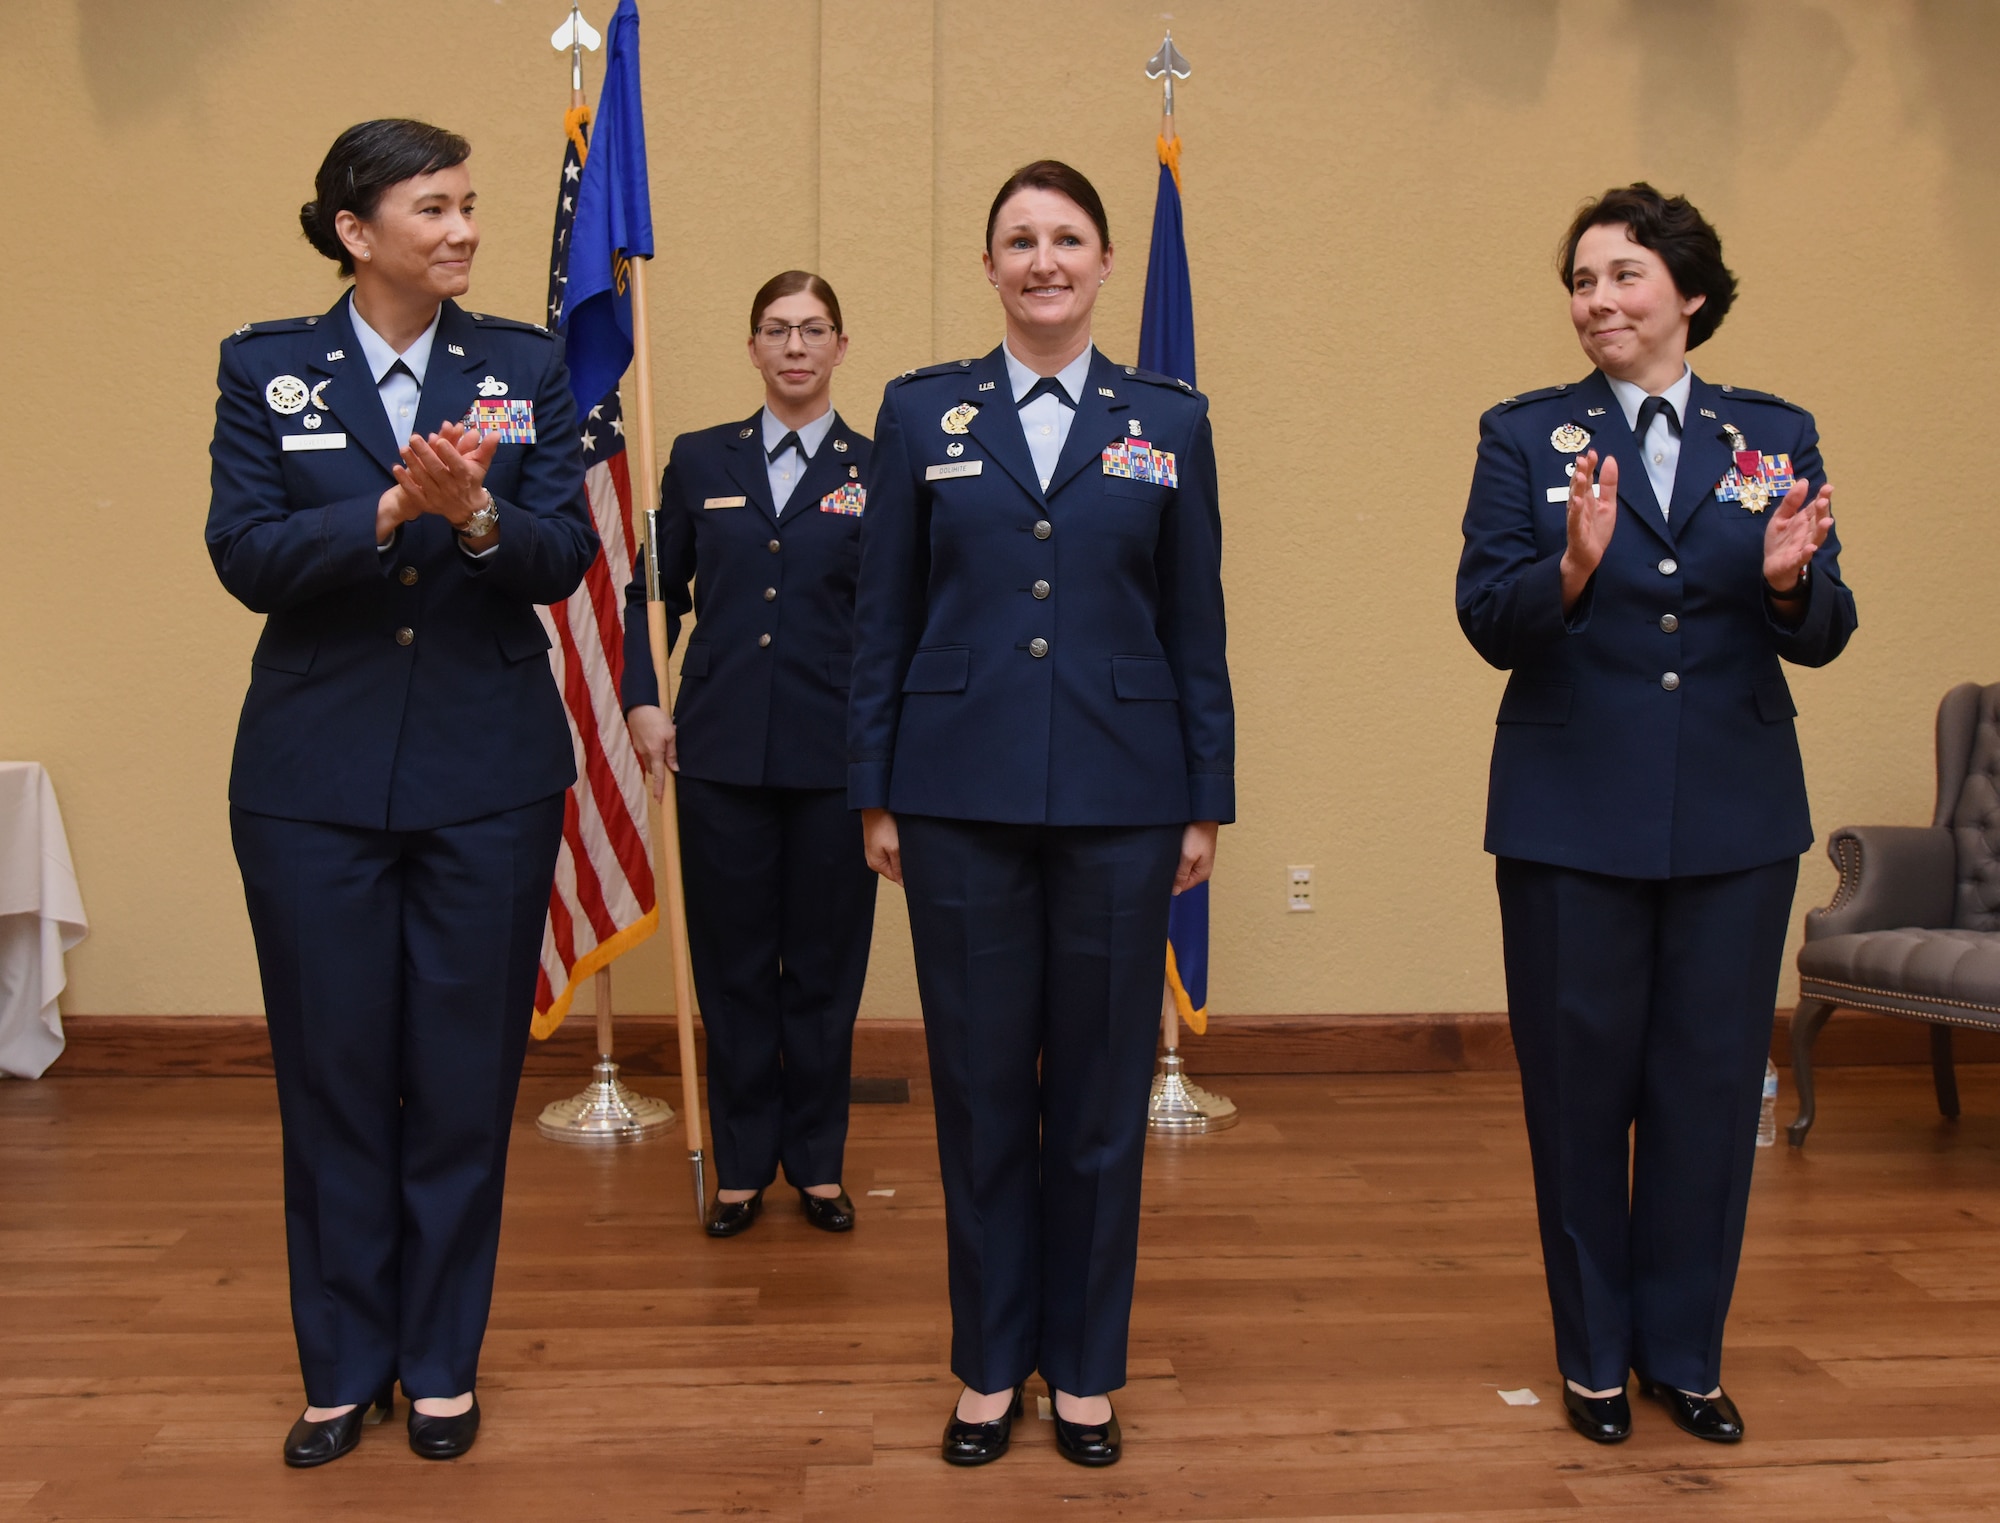 U.S. Air Force Col. Debra Lovette, 81st Training Wing commander, and Col. Jeannine Ryder, outgoing 81st Medical Group commander, congratulate Col. Beatrice Dolihite, incoming 81st MDG commander, during the 81st MDG change of command ceremony in the Bay Breeze Event Center at Keesler Air Force Base, Mississippi, June 22, 2018. The passing of the guidon is a ceremonial symbol of exchanging command from one commander to another. (U.S. Air Force photo by Kemberly Groue)